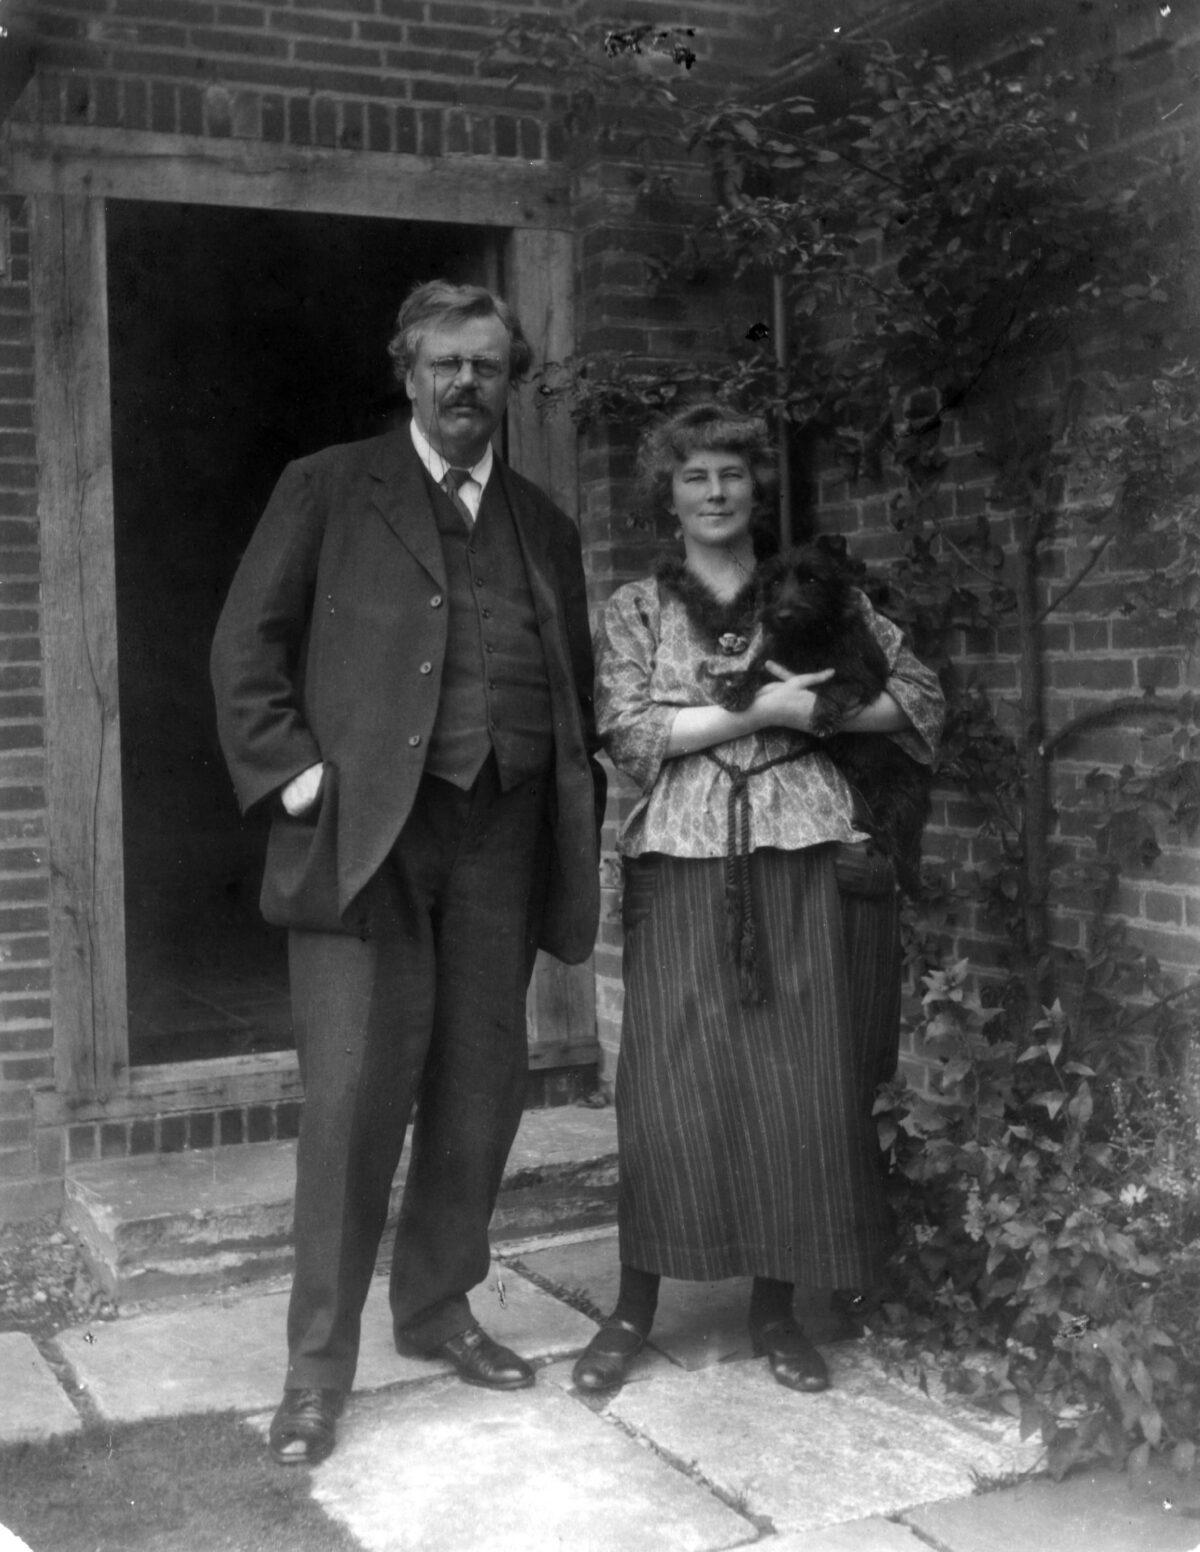 G.K. Chesterton and his beloved wife Frances. (Courtesy of The Society of Gilbert Keith Chesterton)